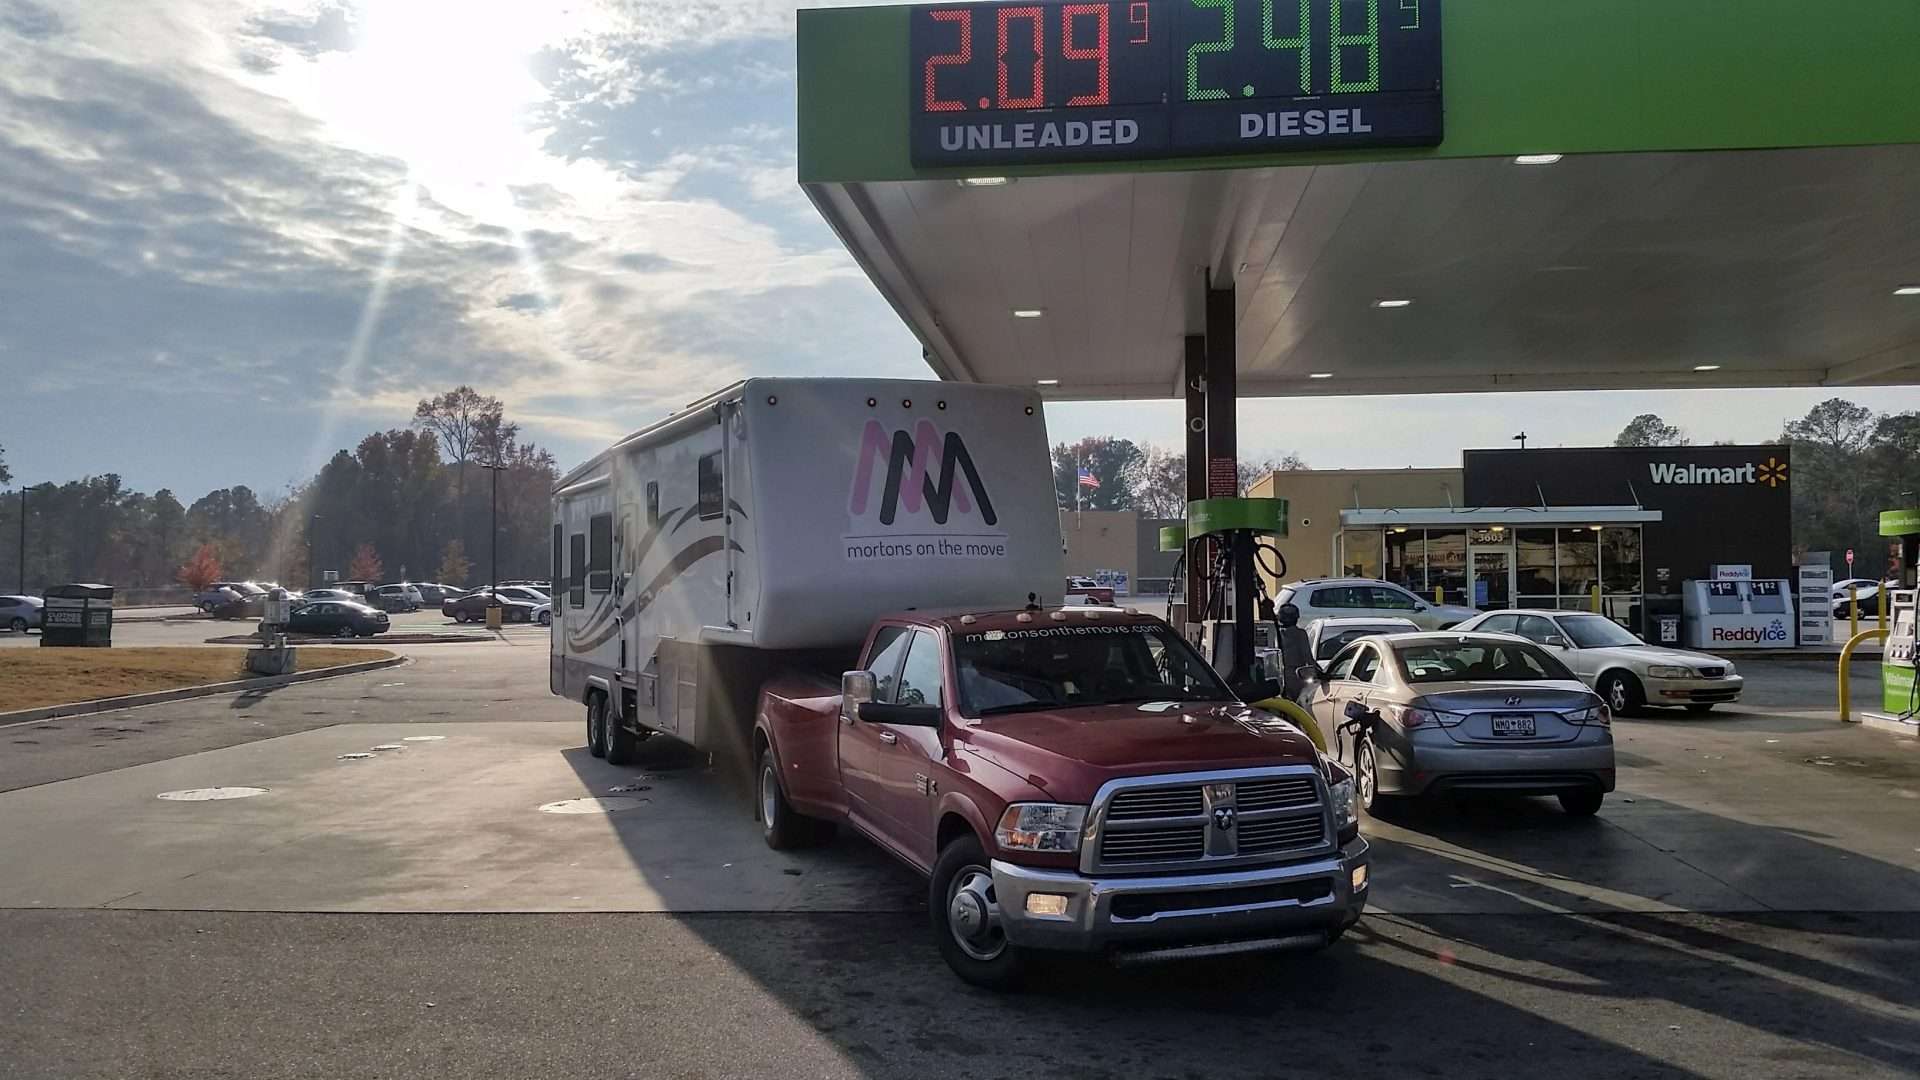 Mortons on the Move truck and fifth wheel at gas station refueling 